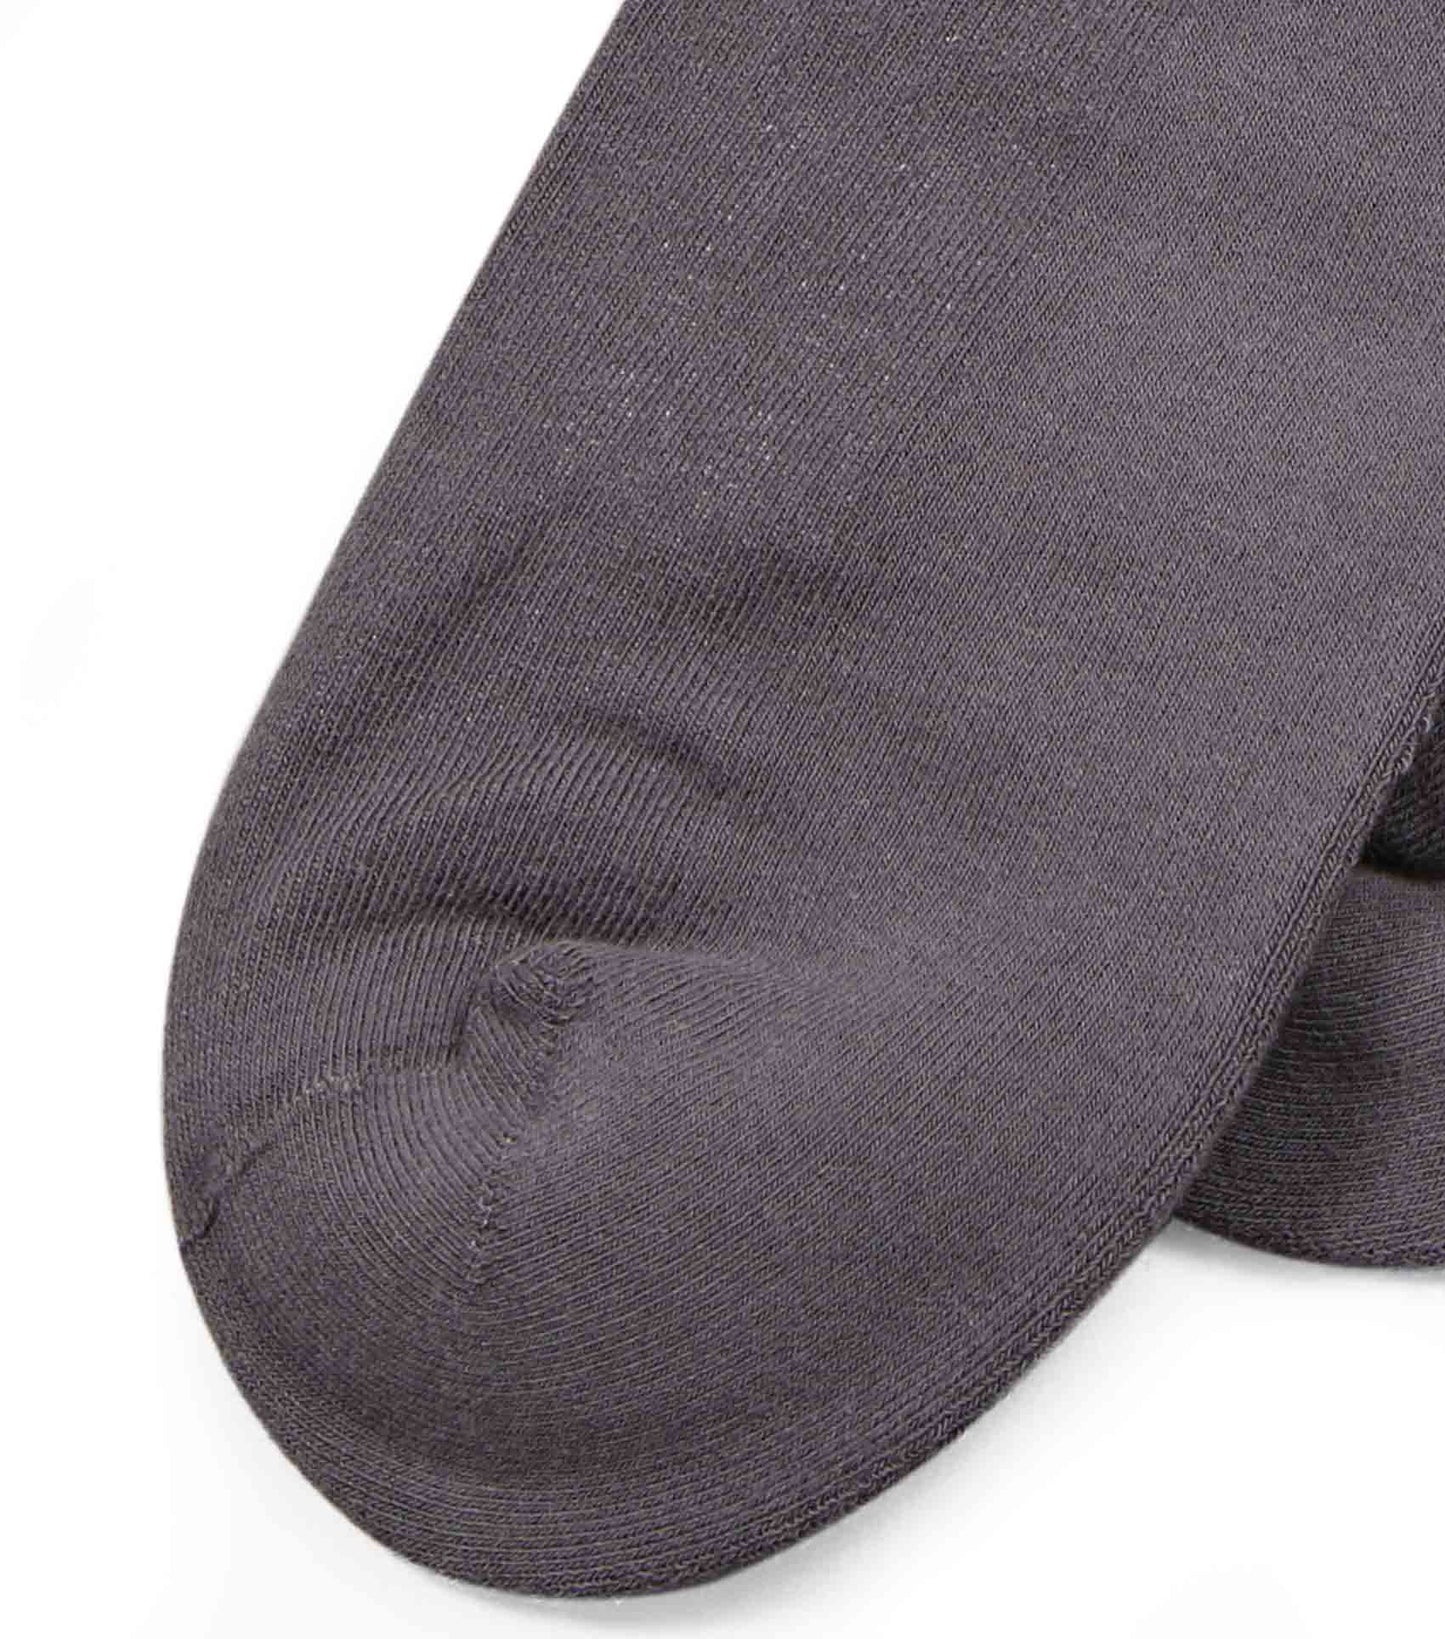 Premier Equine Kids Thick Winter Socks (2 Pairs) - Boys and Girls